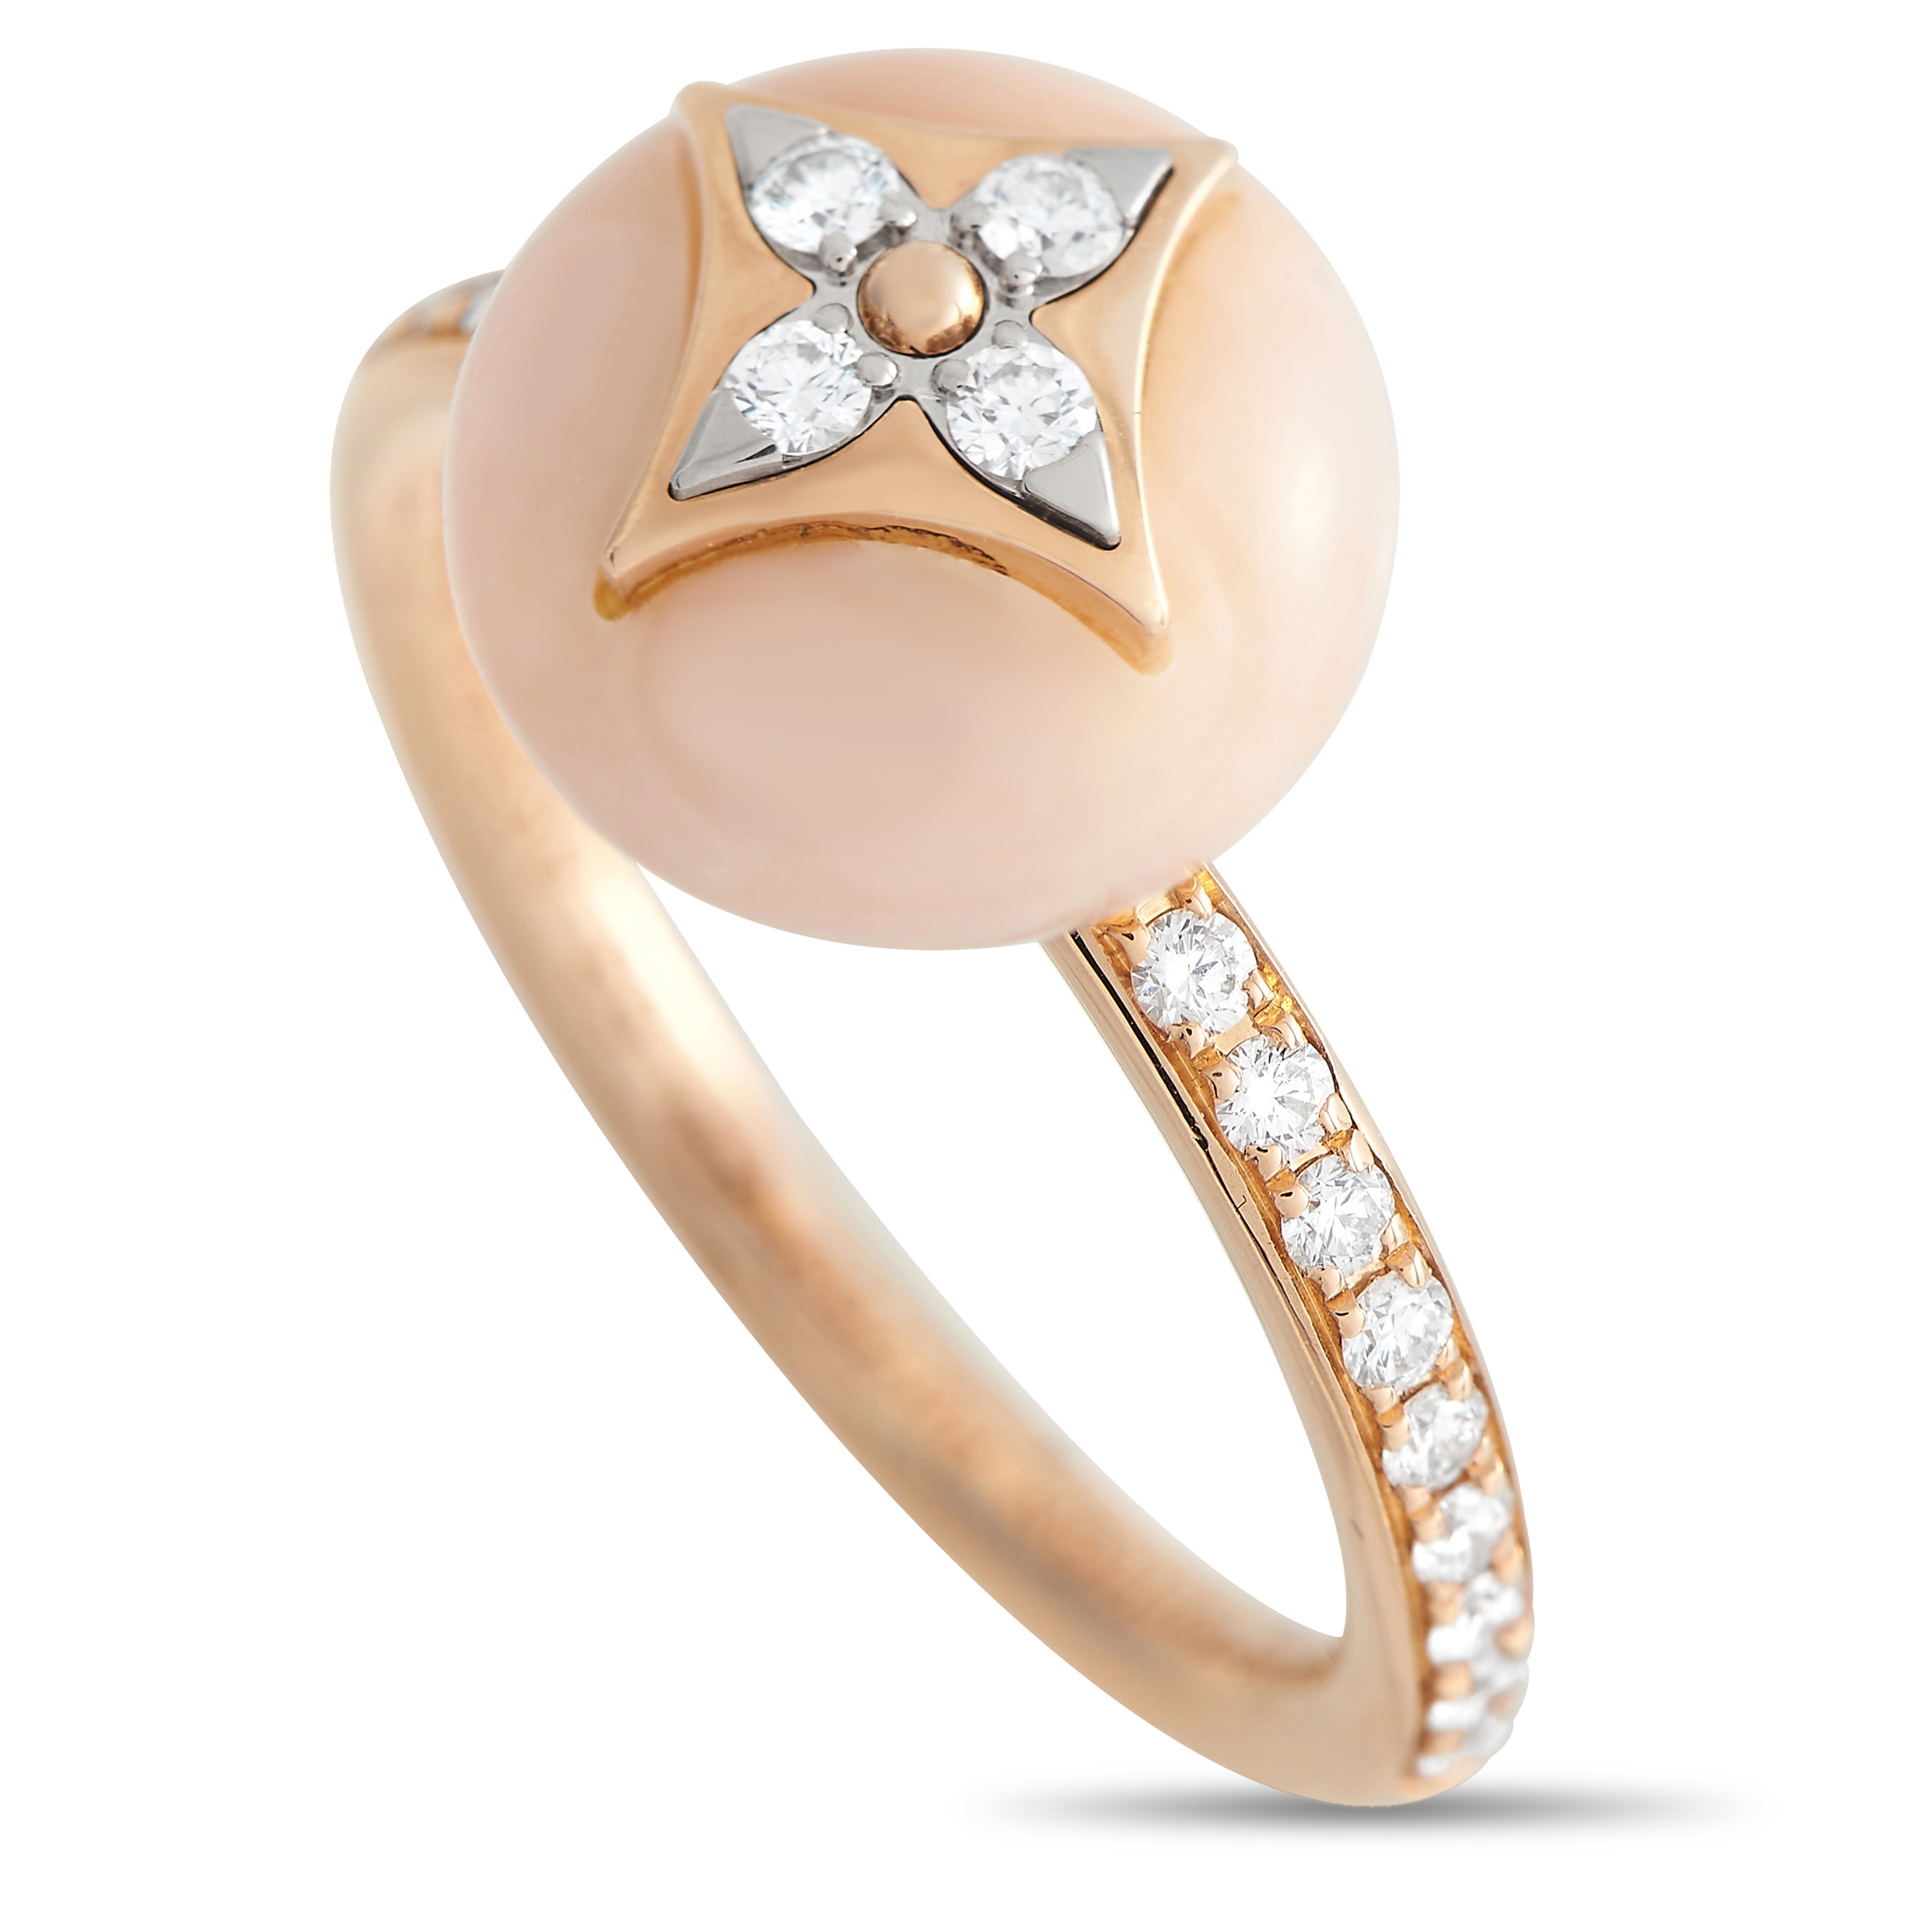 Louis Vuitton Color Blossom Ring, Pink Gold, White Gold, Pink Opal and PavÃ Diamond. Size 52